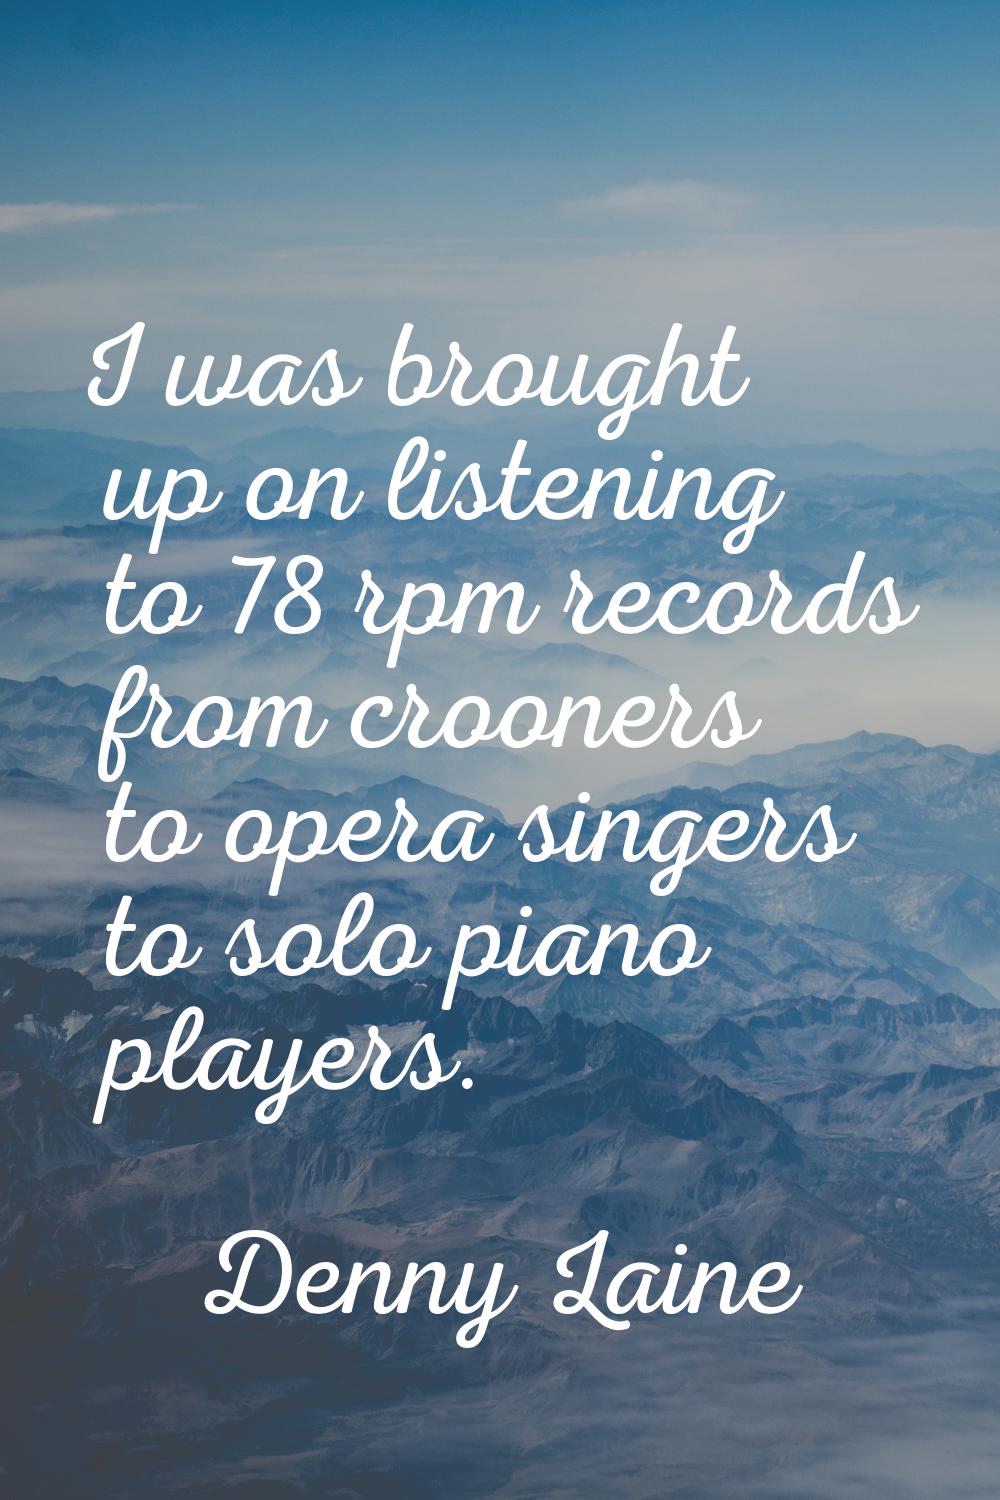 I was brought up on listening to 78 rpm records from crooners to opera singers to solo piano player